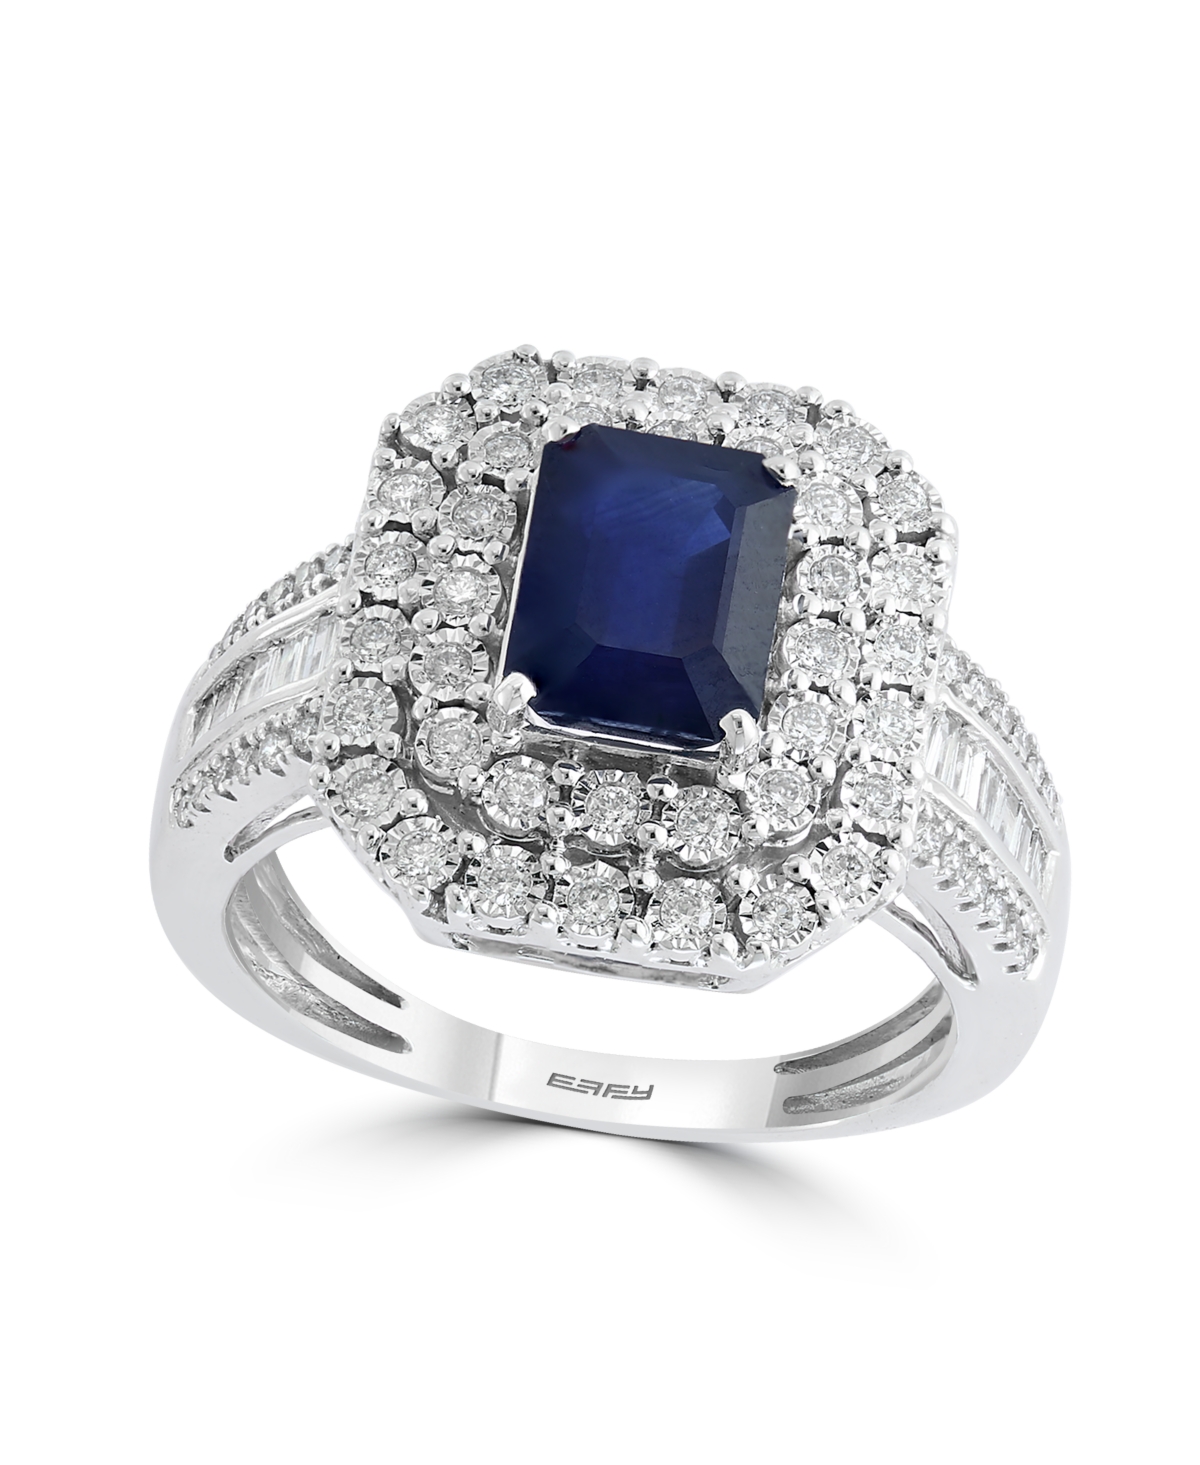 Effy Sapphire (1-1/2 ct. t.w) and Diamond (1/2 ct. t.w) Ring in 14K White Gold (Also Available In Tanzanite) - Tanzanite